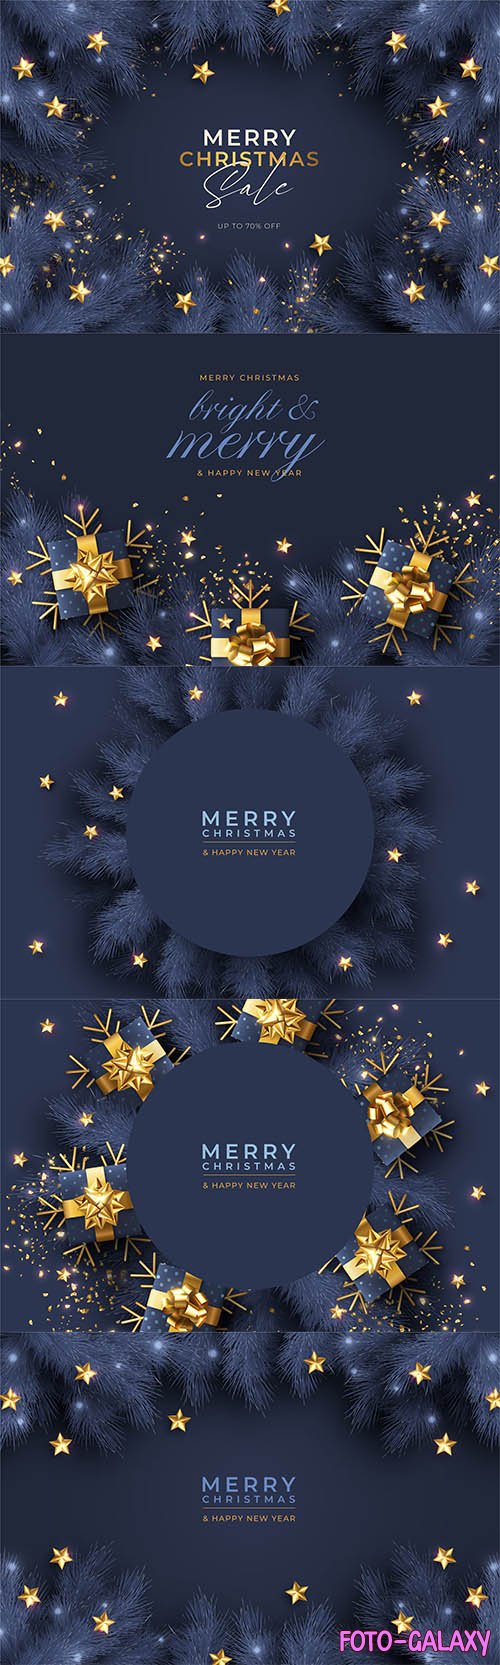 Vector christmas background with winter nature and ornaments